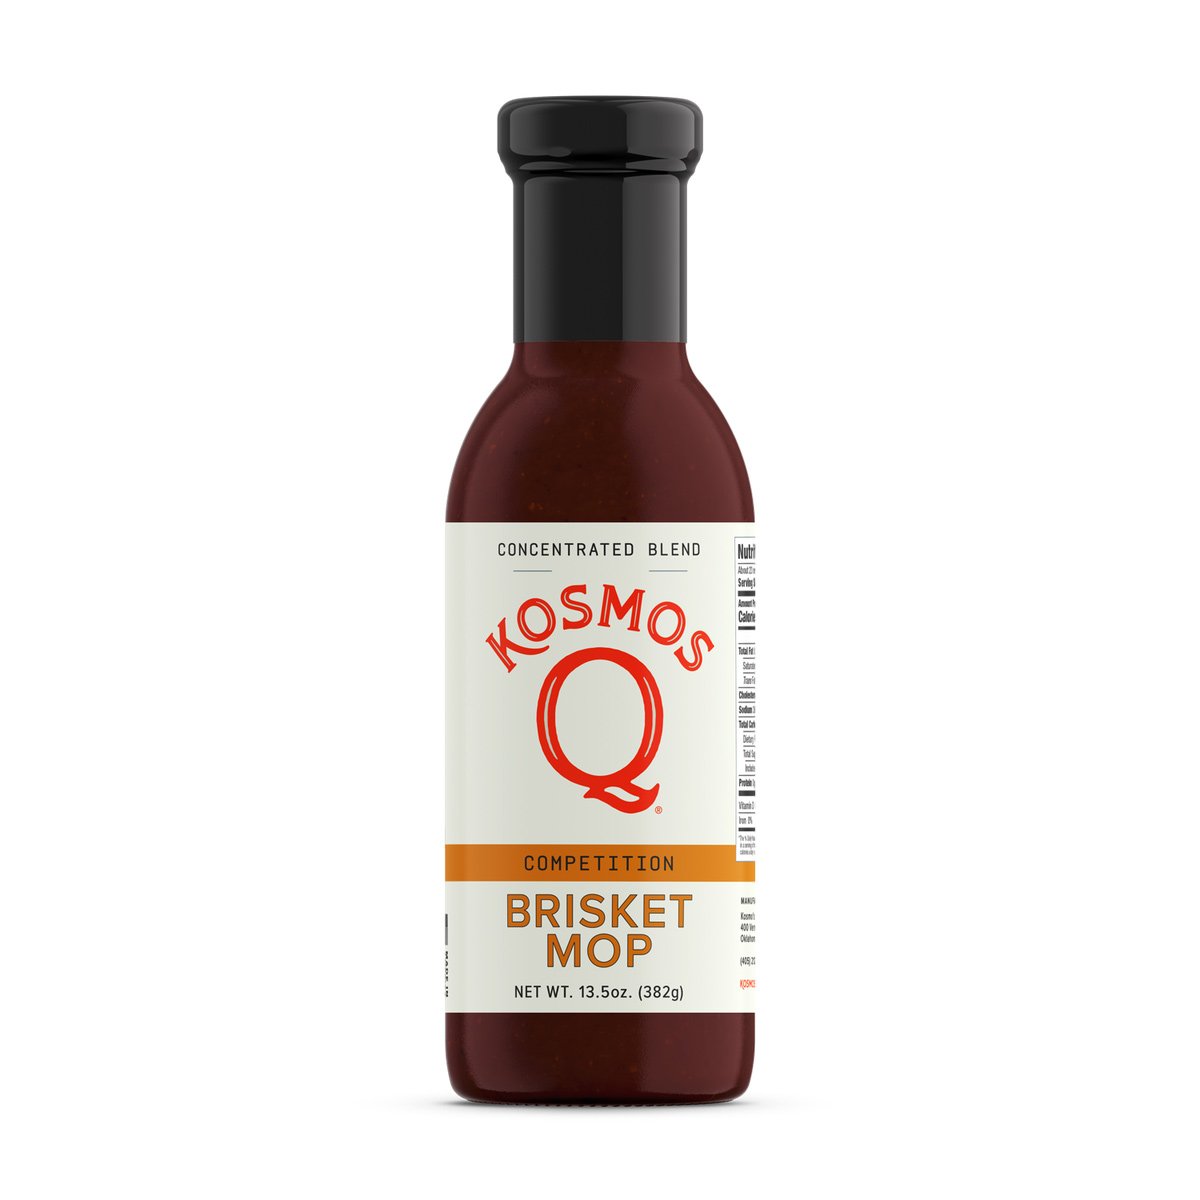 Kosmo's Q Brines and Soaks Single Bottle Competition Brisket Mop